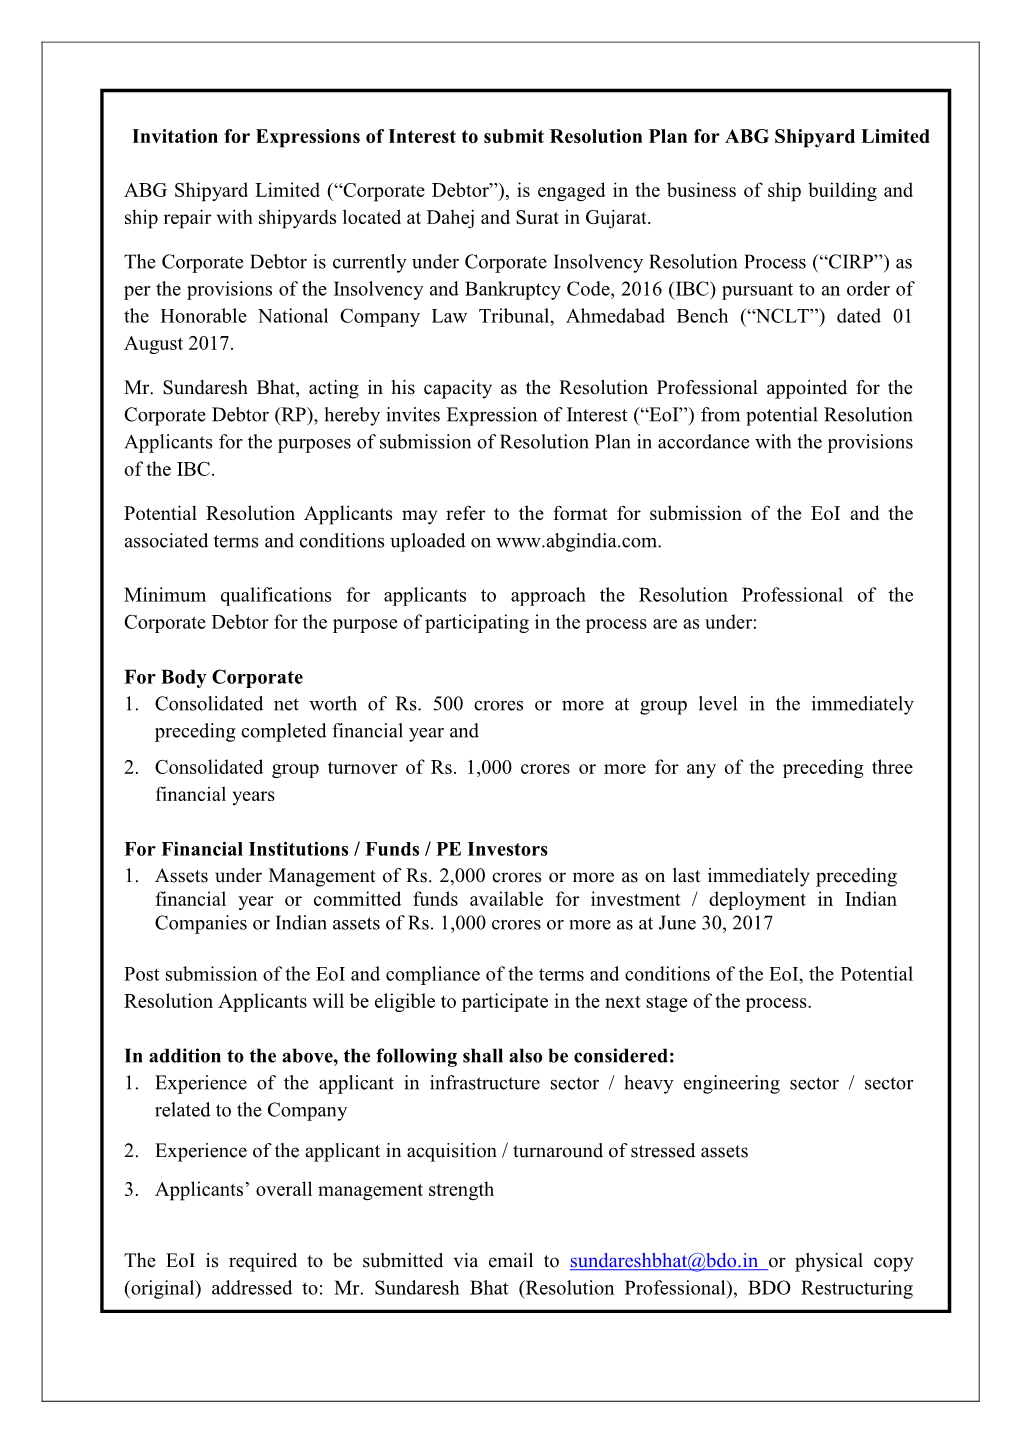 Invitation for Expressions of Interest to Submit Resolution Plan for ABG Shipyard Limited ABG Shipyard Limited (“Corporate De